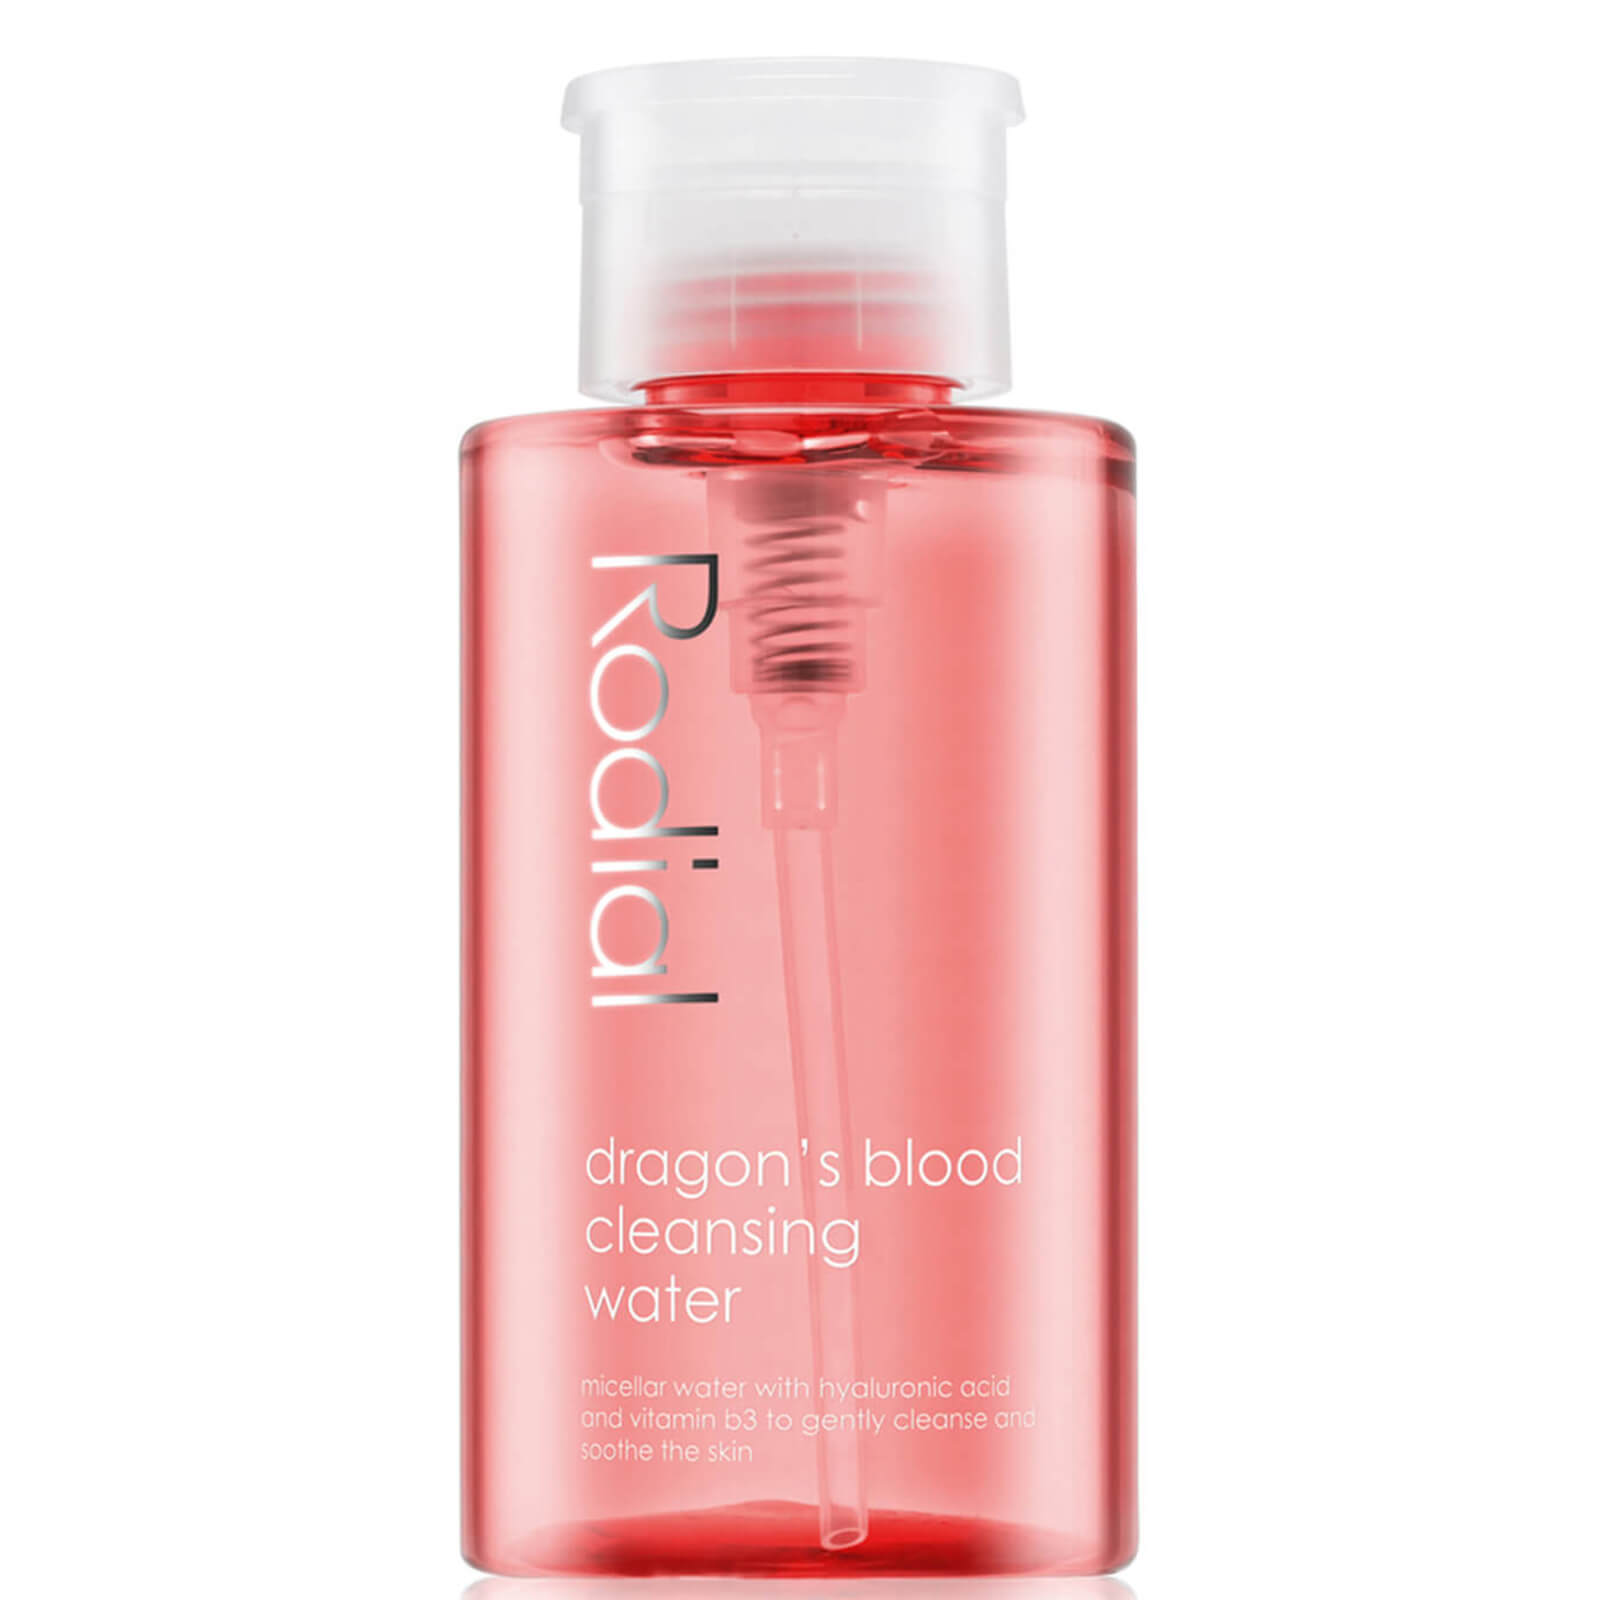 Photos - Facial / Body Cleansing Product Rodial Dragon's Blood Cleansing Water 300ml SKDBCLNW320 